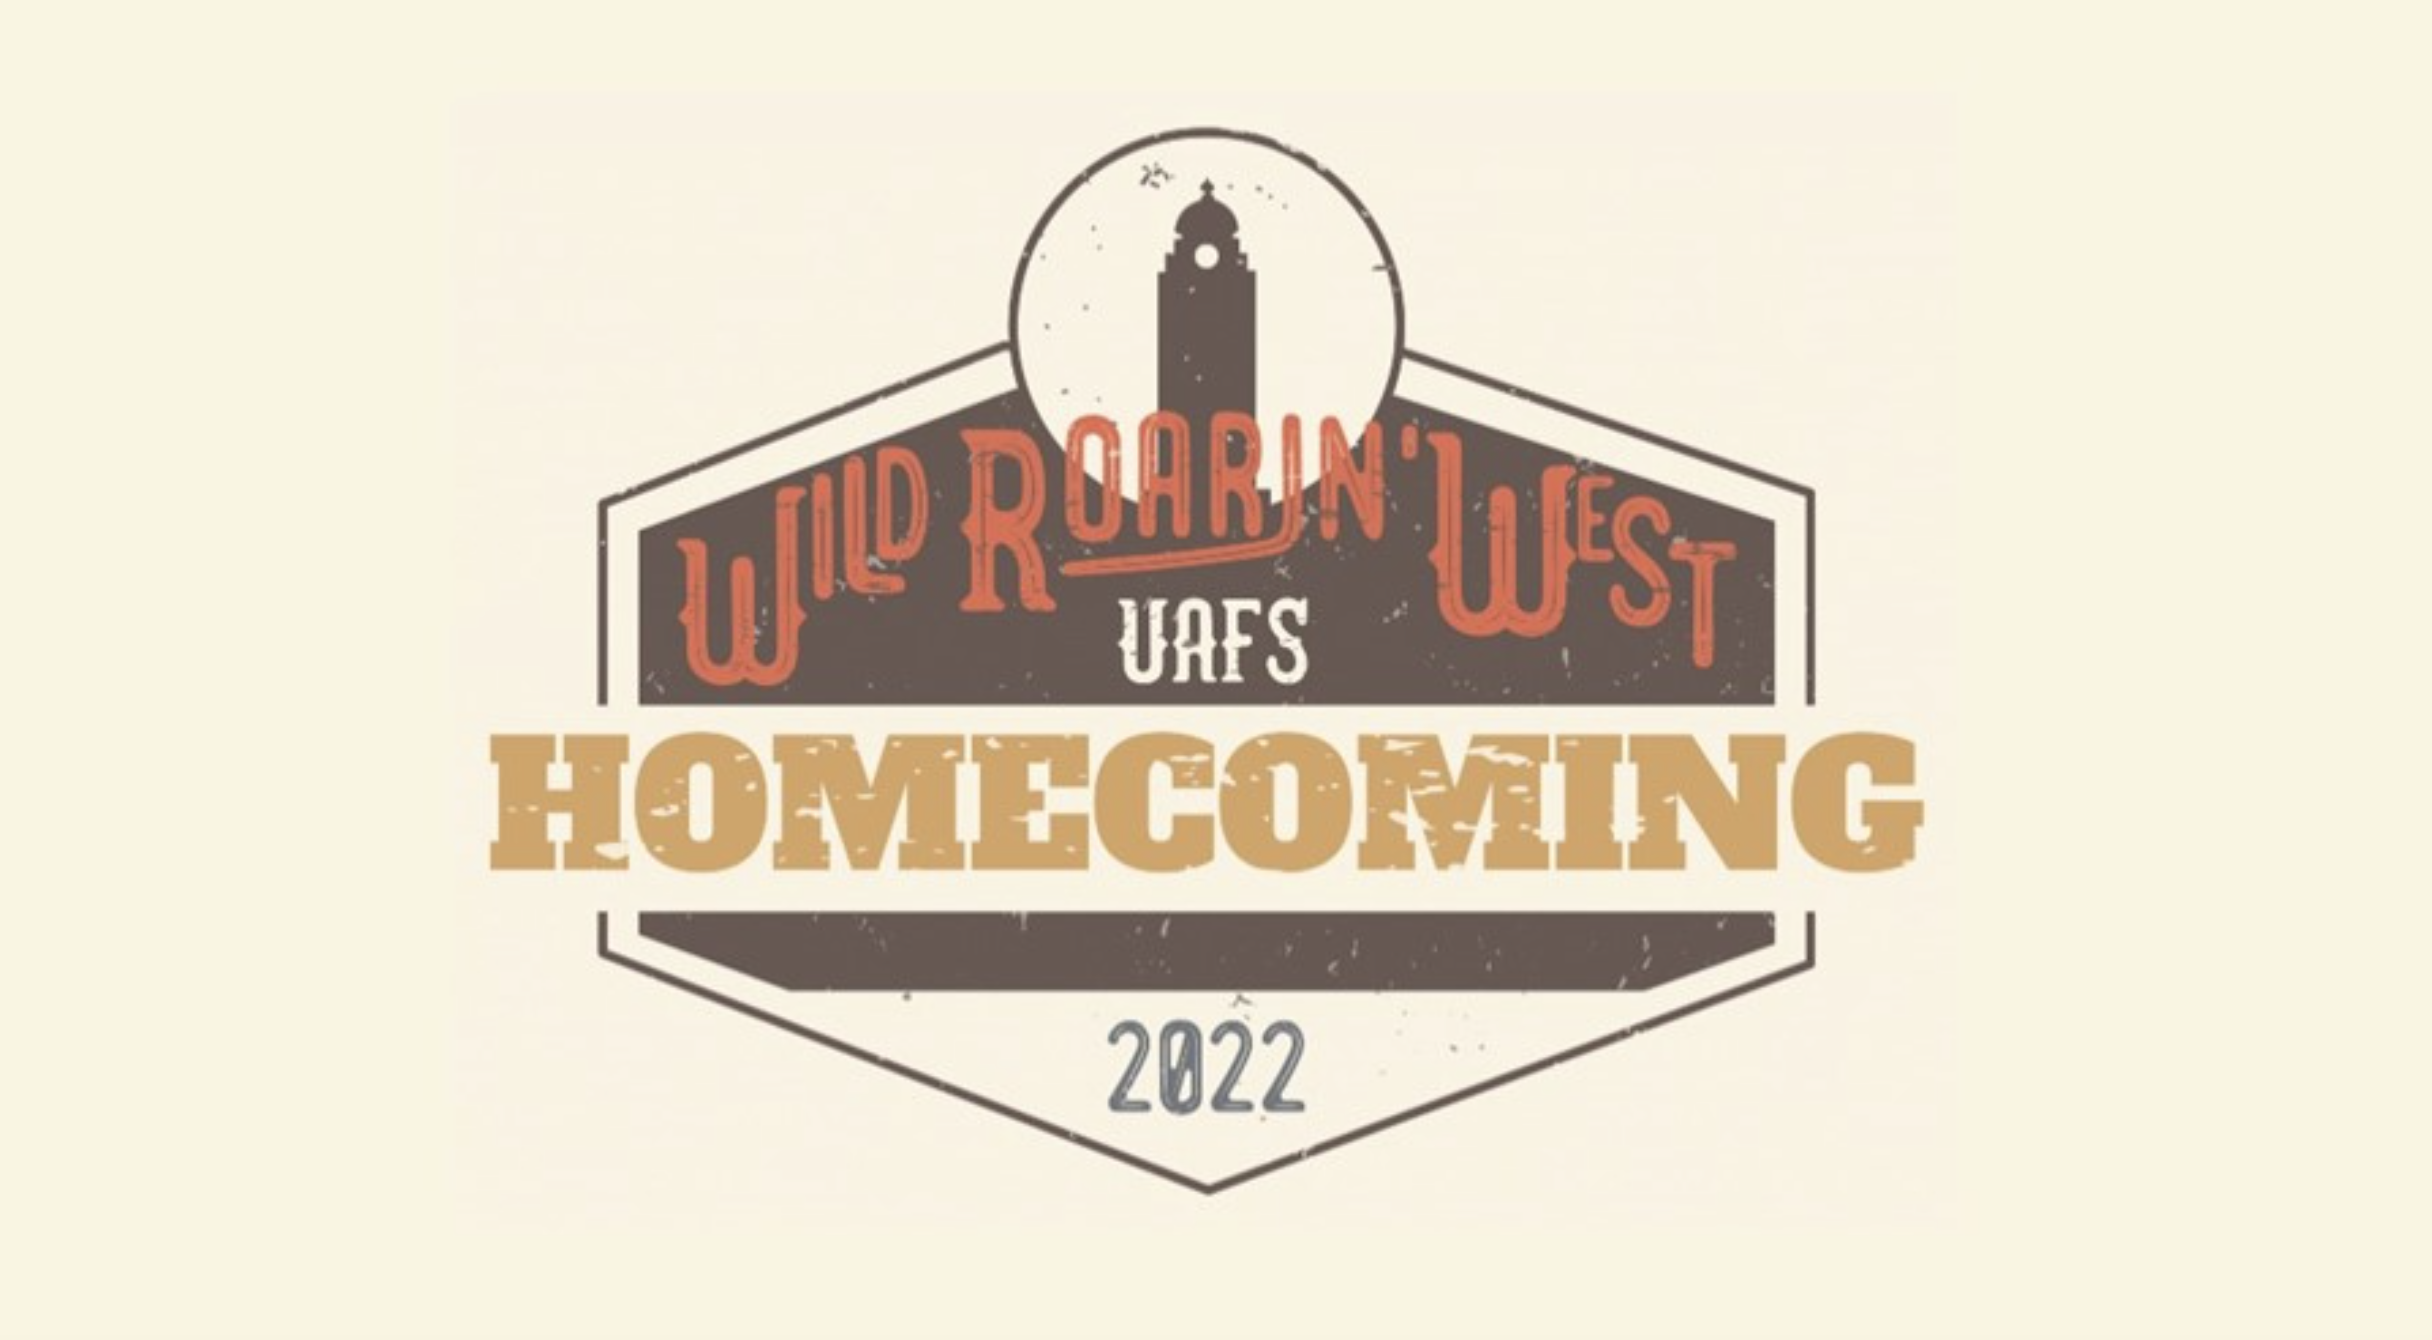 Homecoming Logo for 2022. States:  Wild Roaring West UAFS 2022